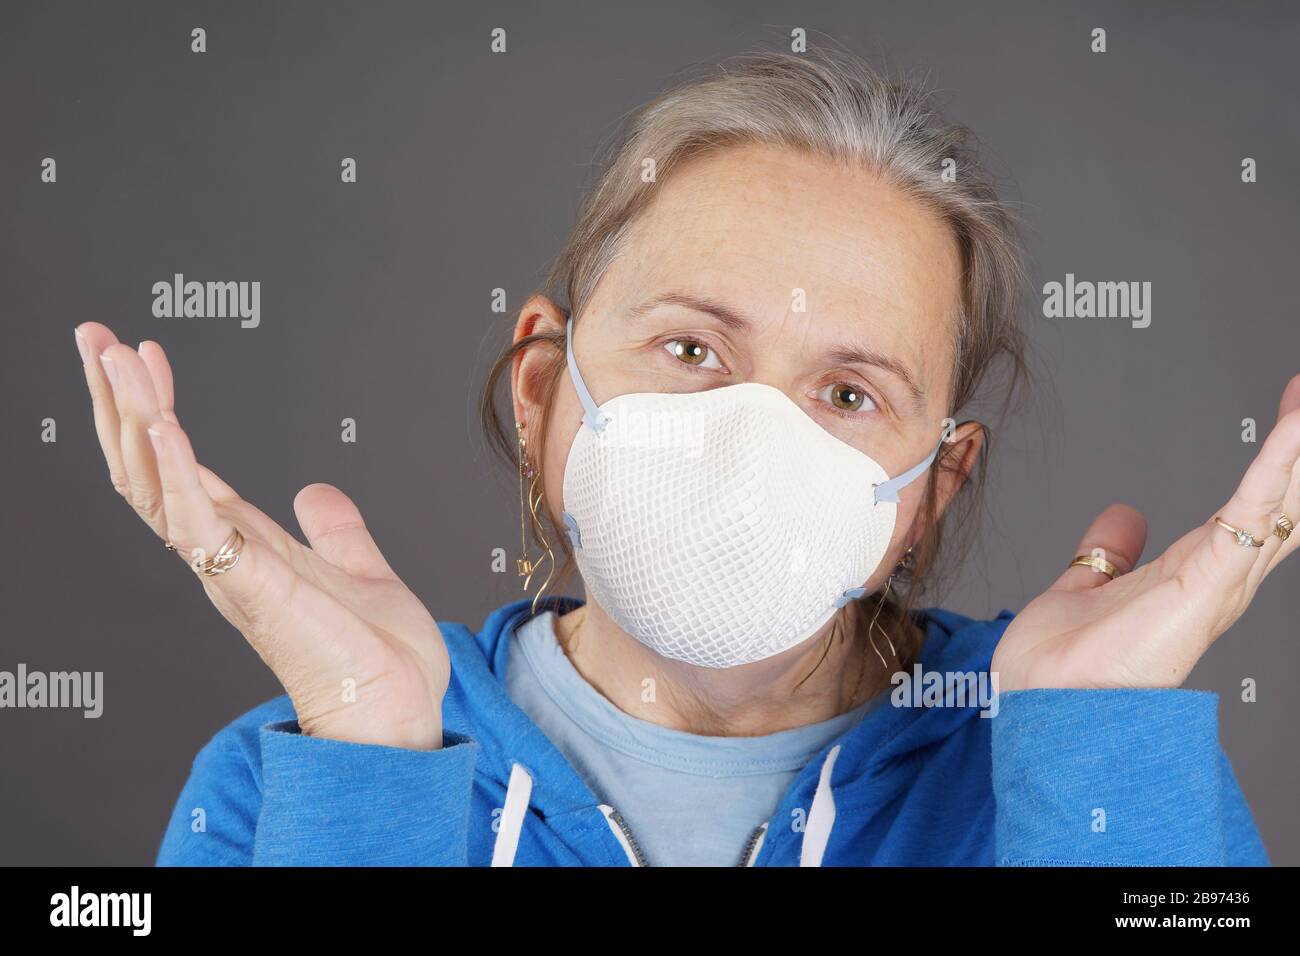 Woman with mask raising hands coping with pandemic coronavirus COVID-19 Stock Photo